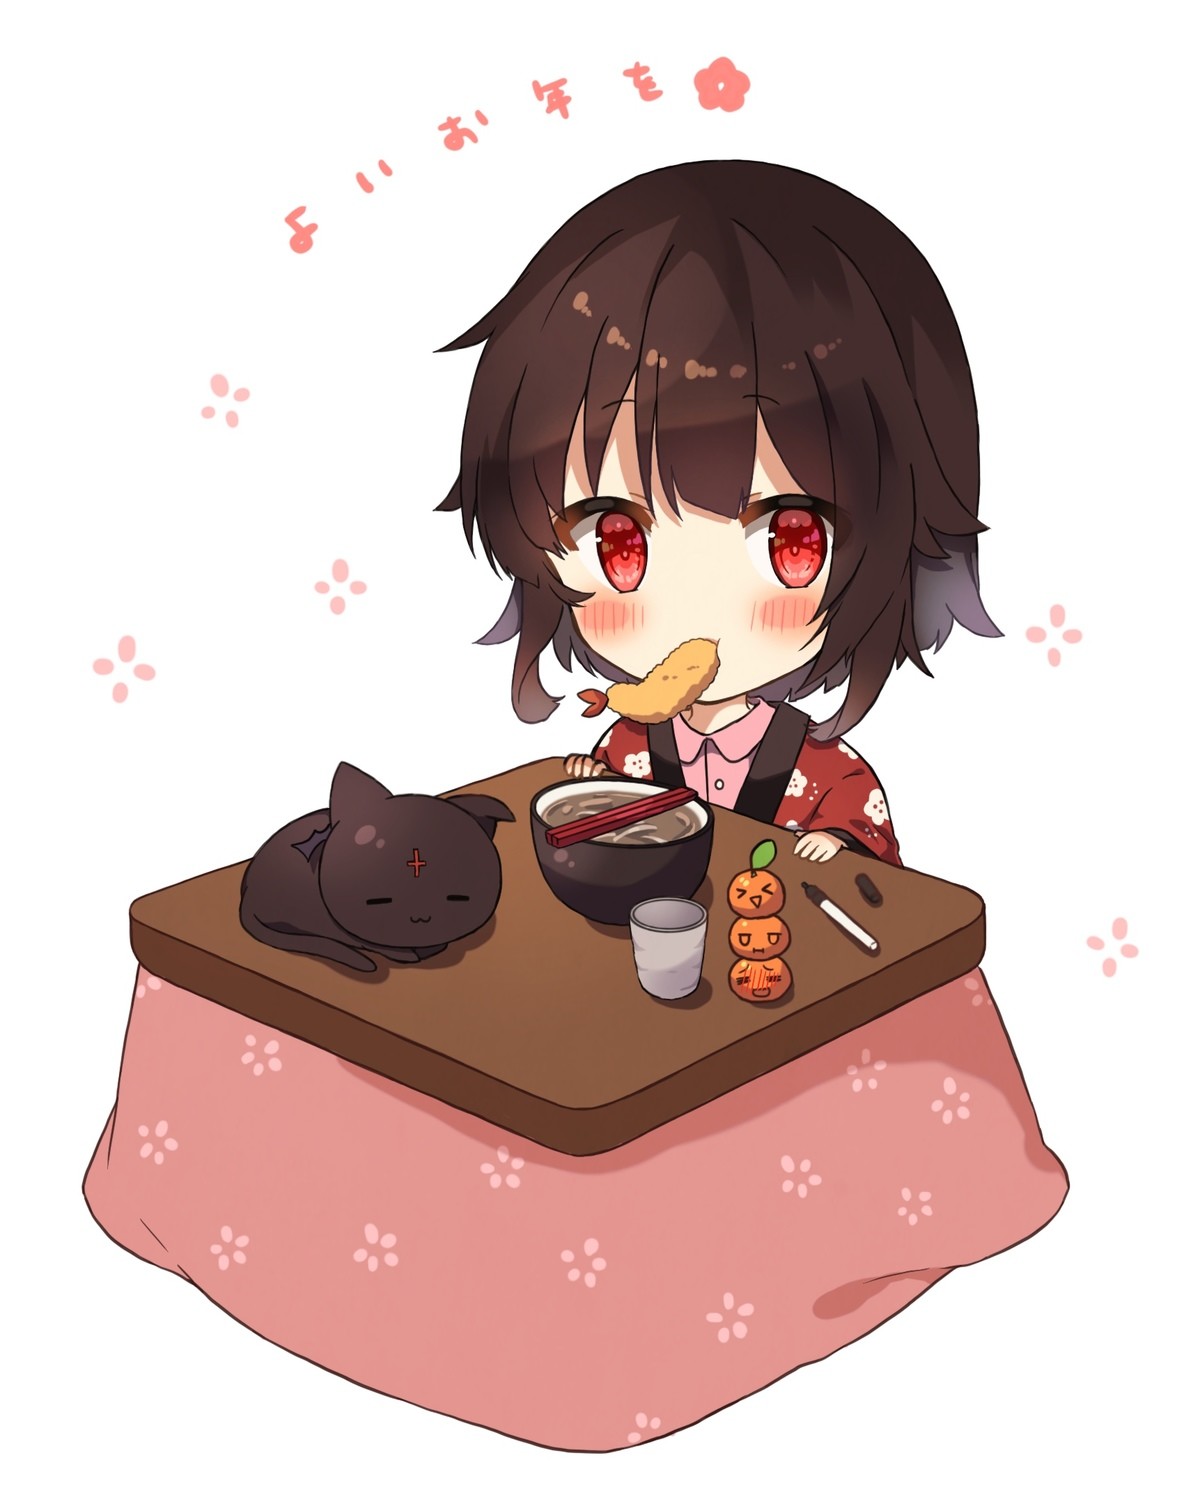 Daily Megu - 997: Eat. join list: DailySplosion (826 subs)Mention History Source: .. EAT SOME MEAT.